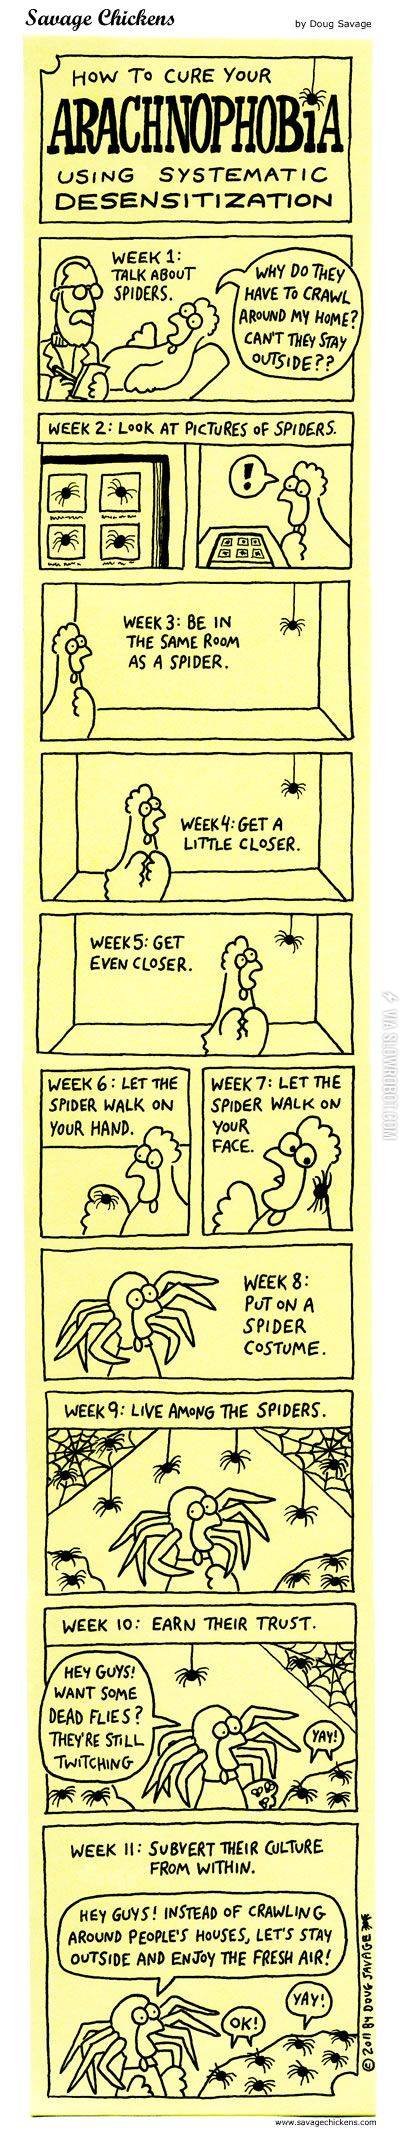 How+to+cure+your+arachnophobia.